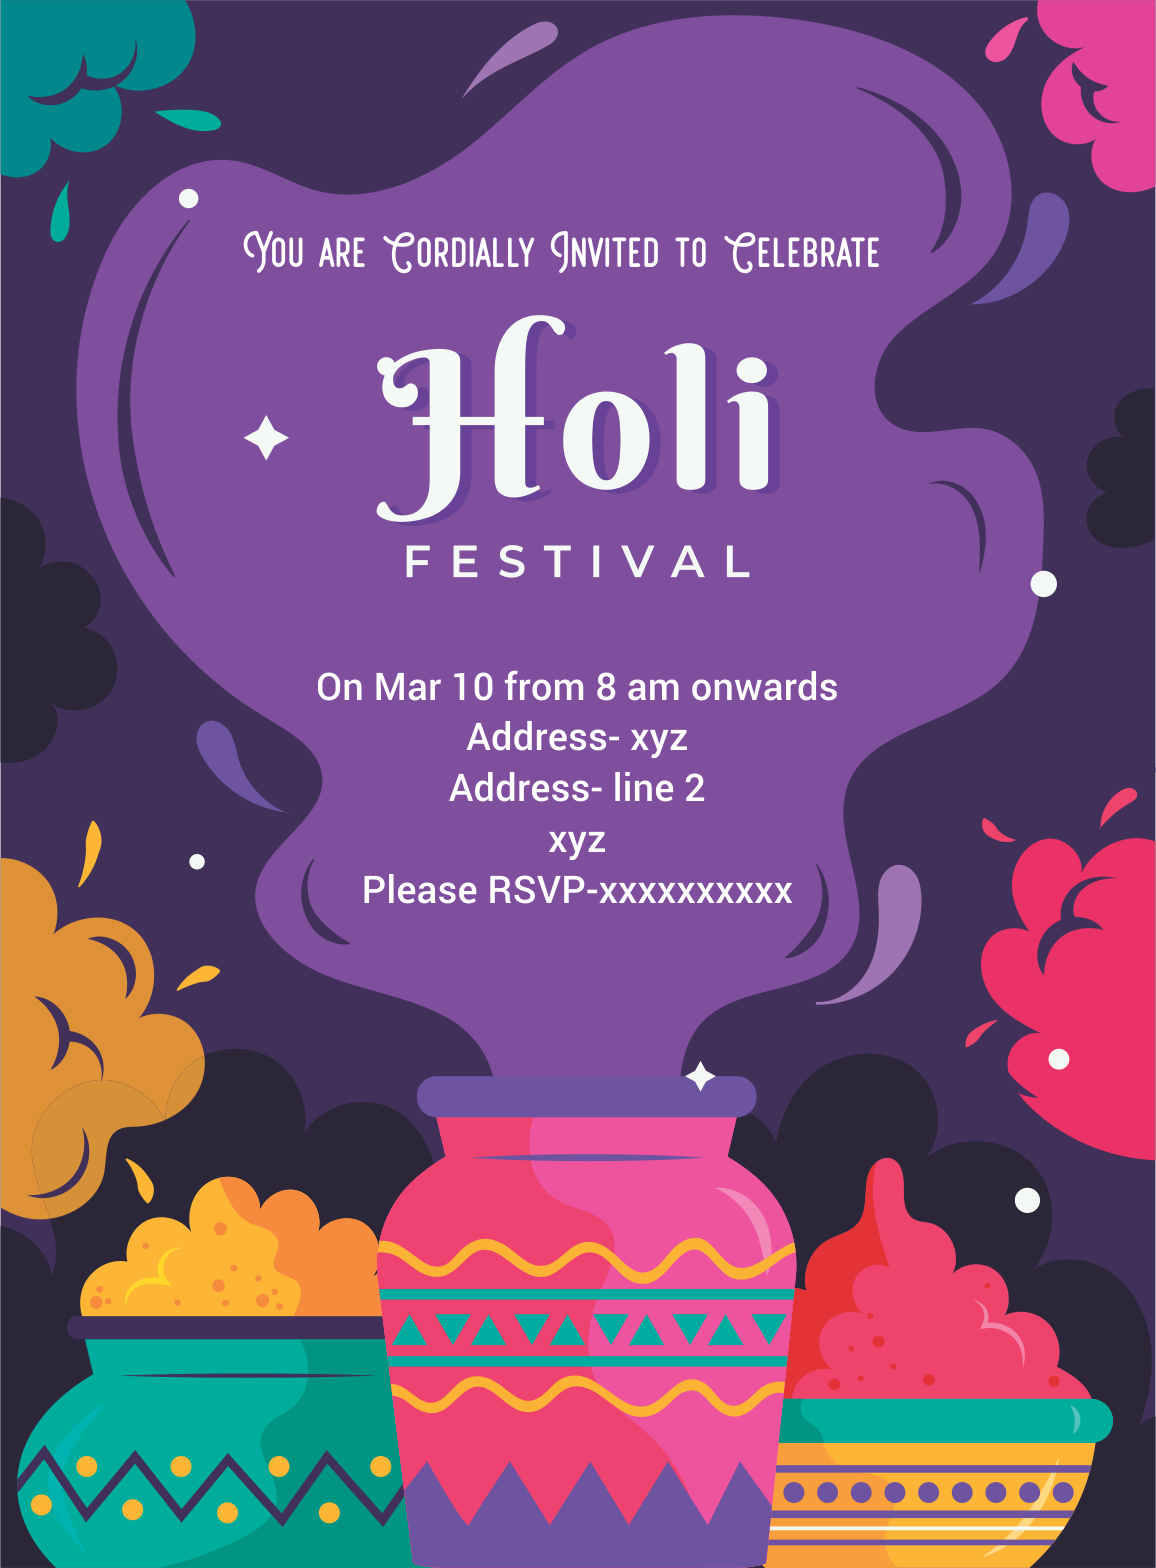 10+ Ideas To Make Your Holi Party Great Fun